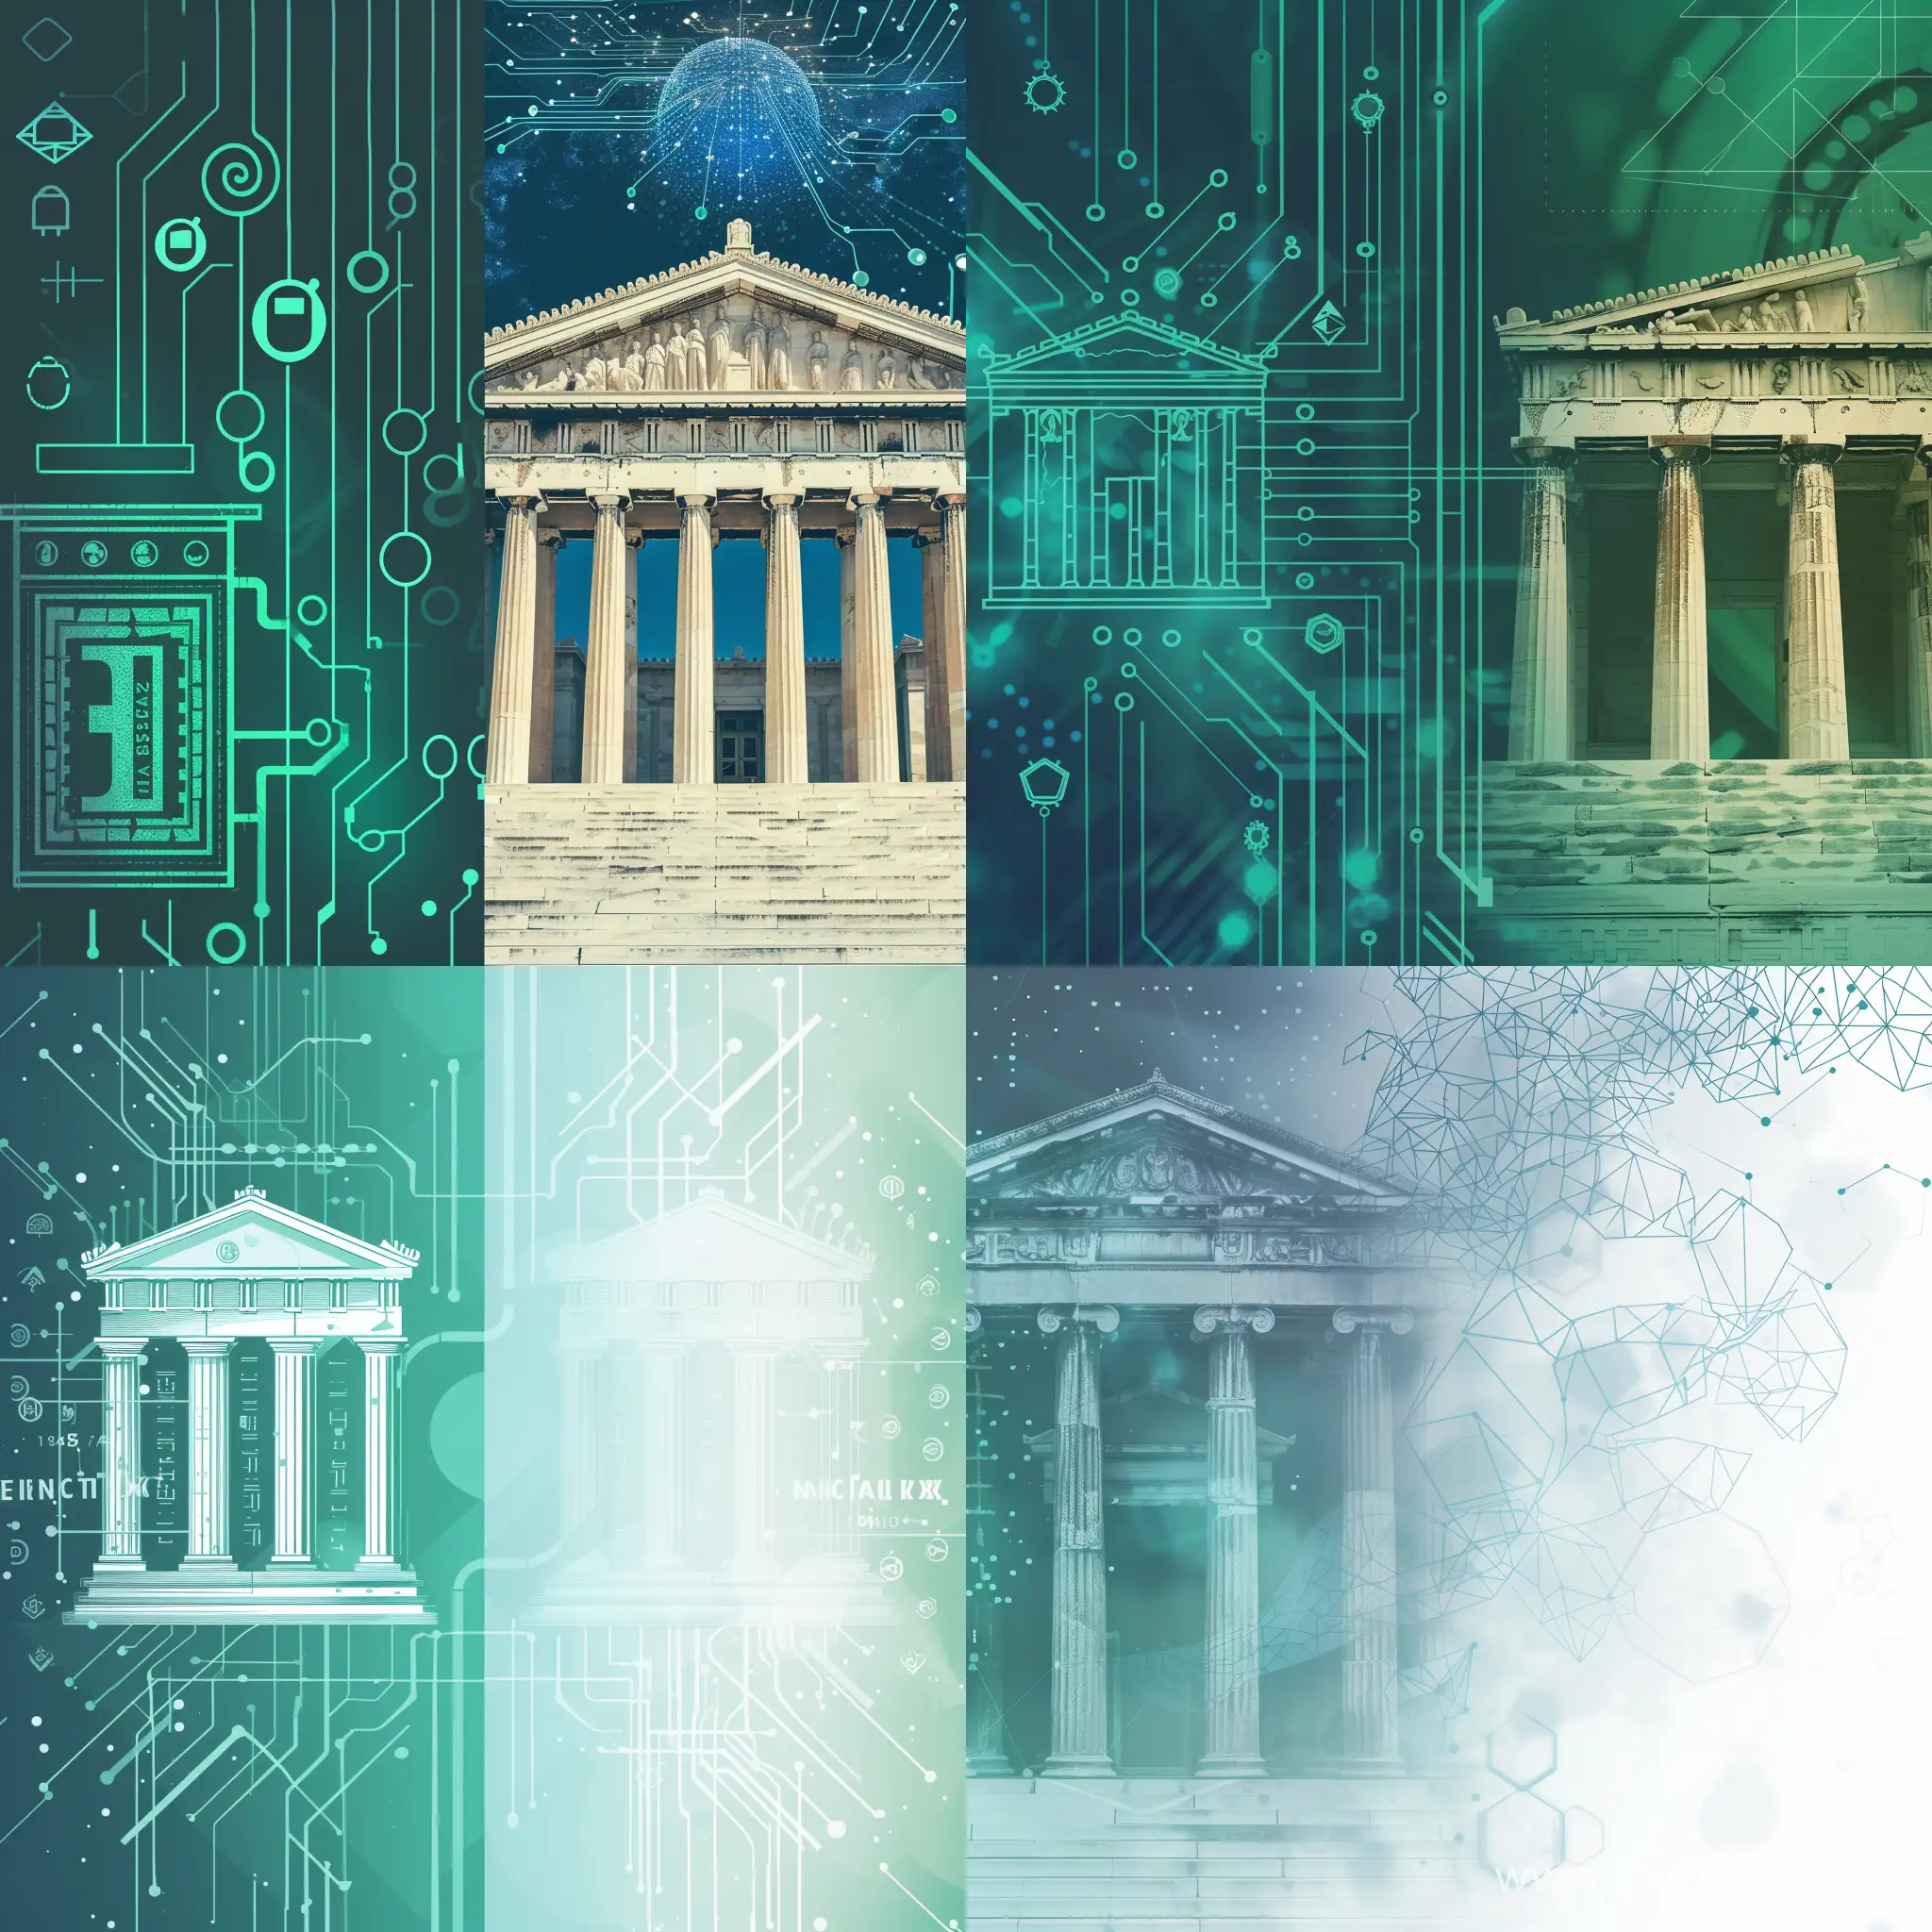 technologic background, blockchain, digital, light blue and green, old greek bank icon on the left in the same style
 

